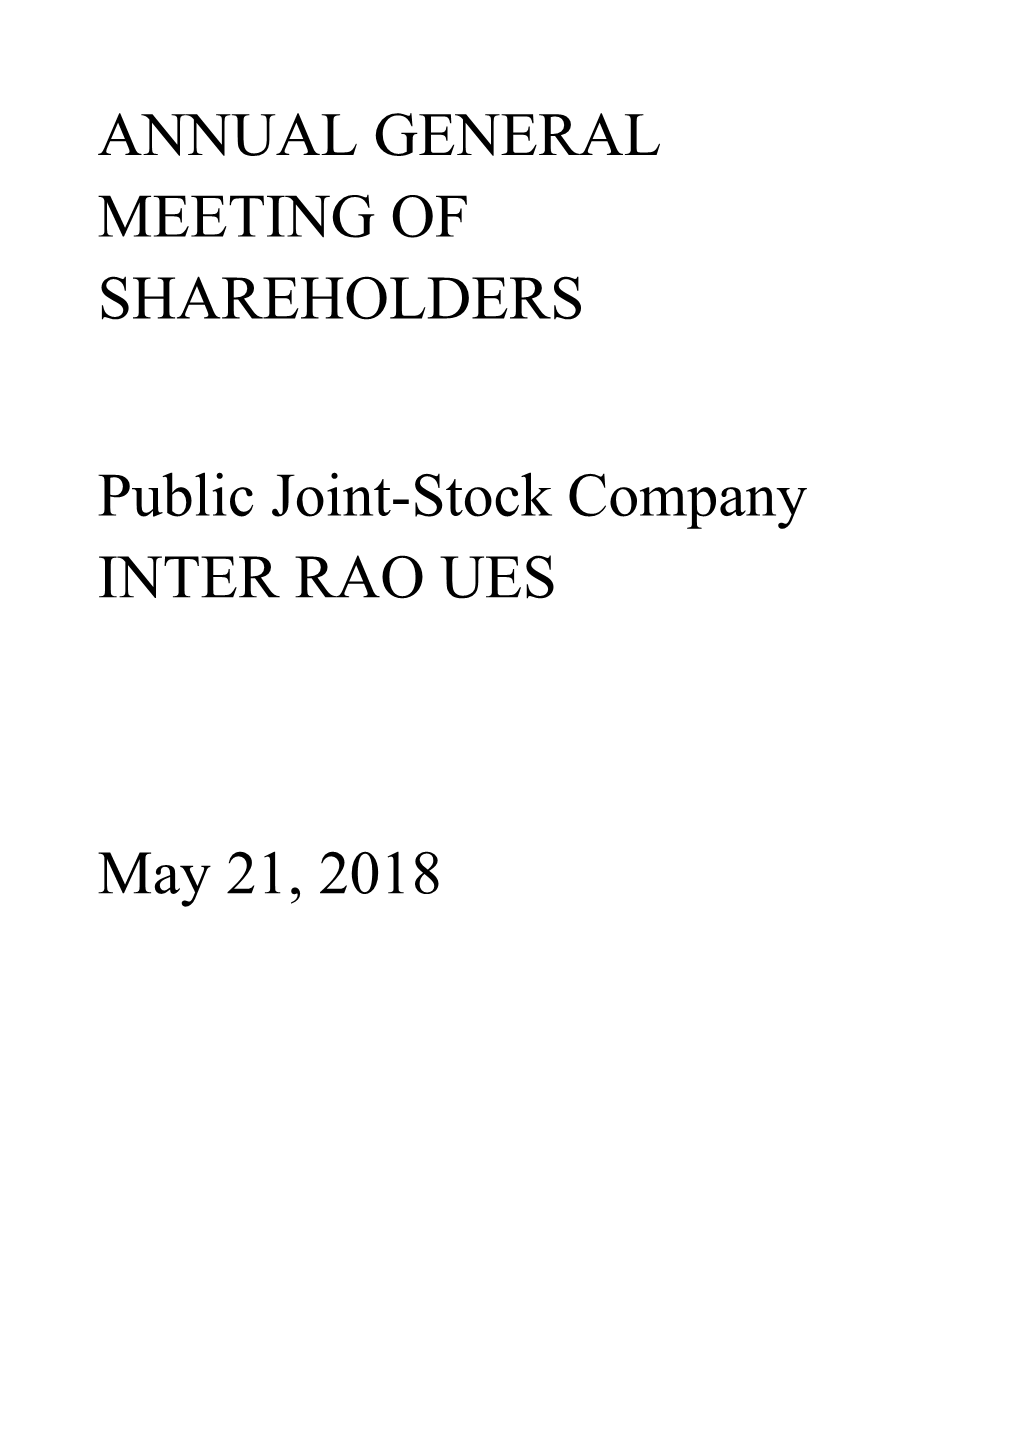 ANNUAL GENERAL MEETING of SHAREHOLDERS Public Joint-Stock Company Inter RAO UES Location: Moscow, Russian Federation